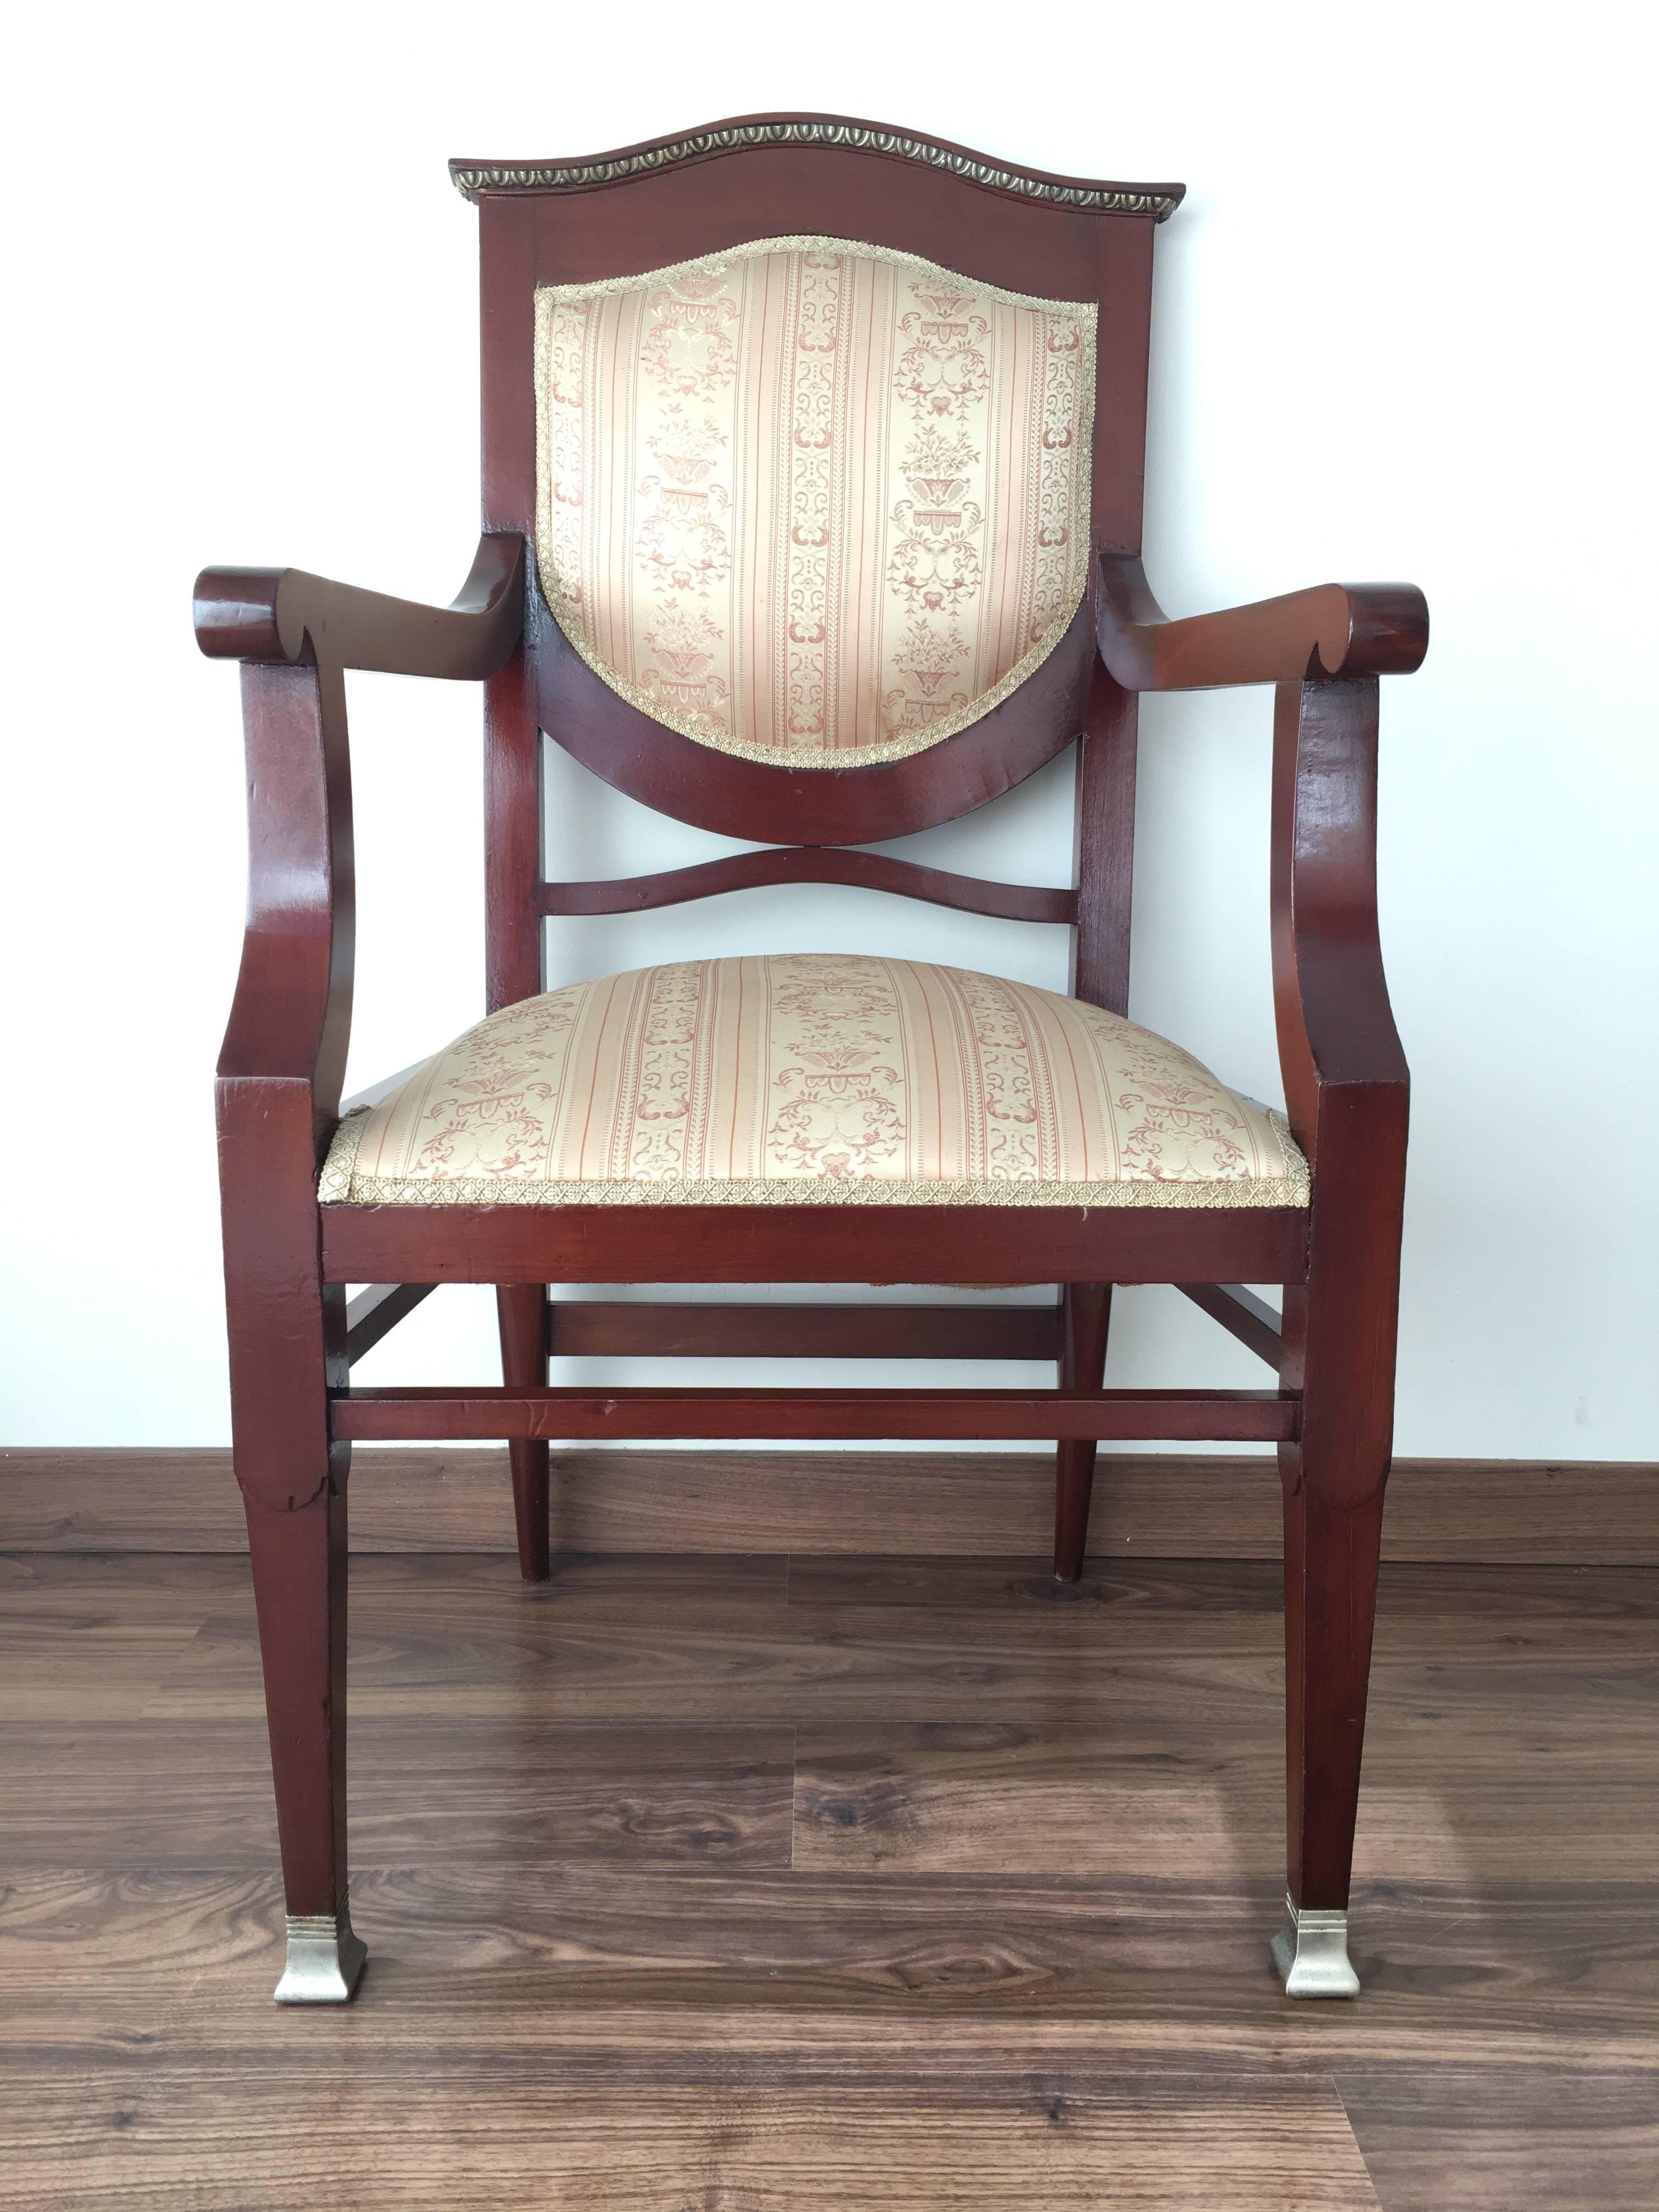 European 19th Century Regency Pair of Armchairs in Mahogany Influenced Art Deco Style For Sale